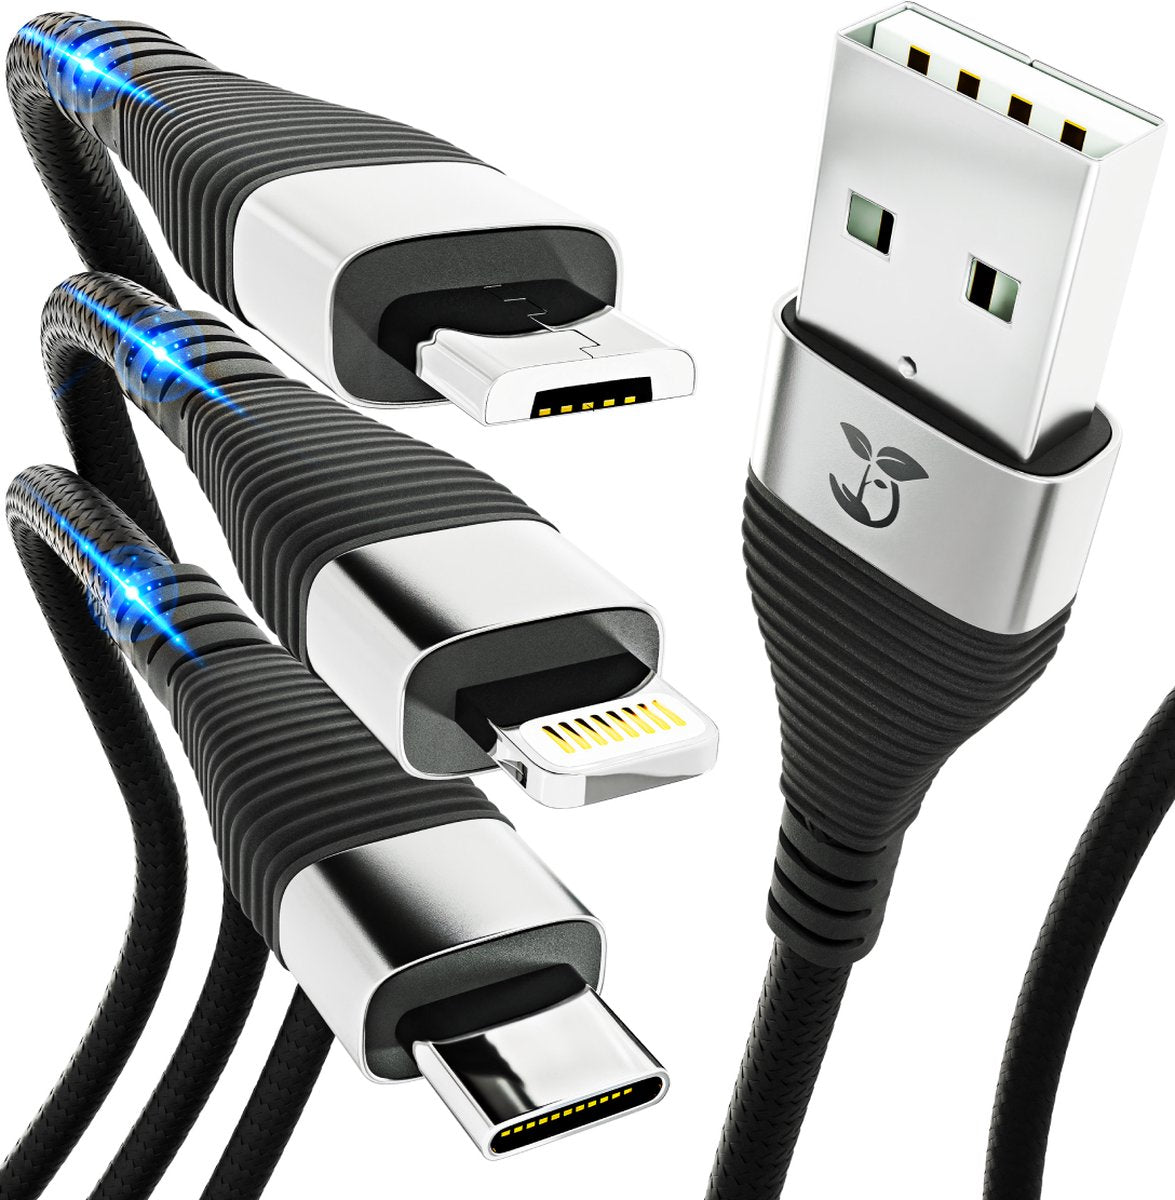 3 Headed Charging Cable